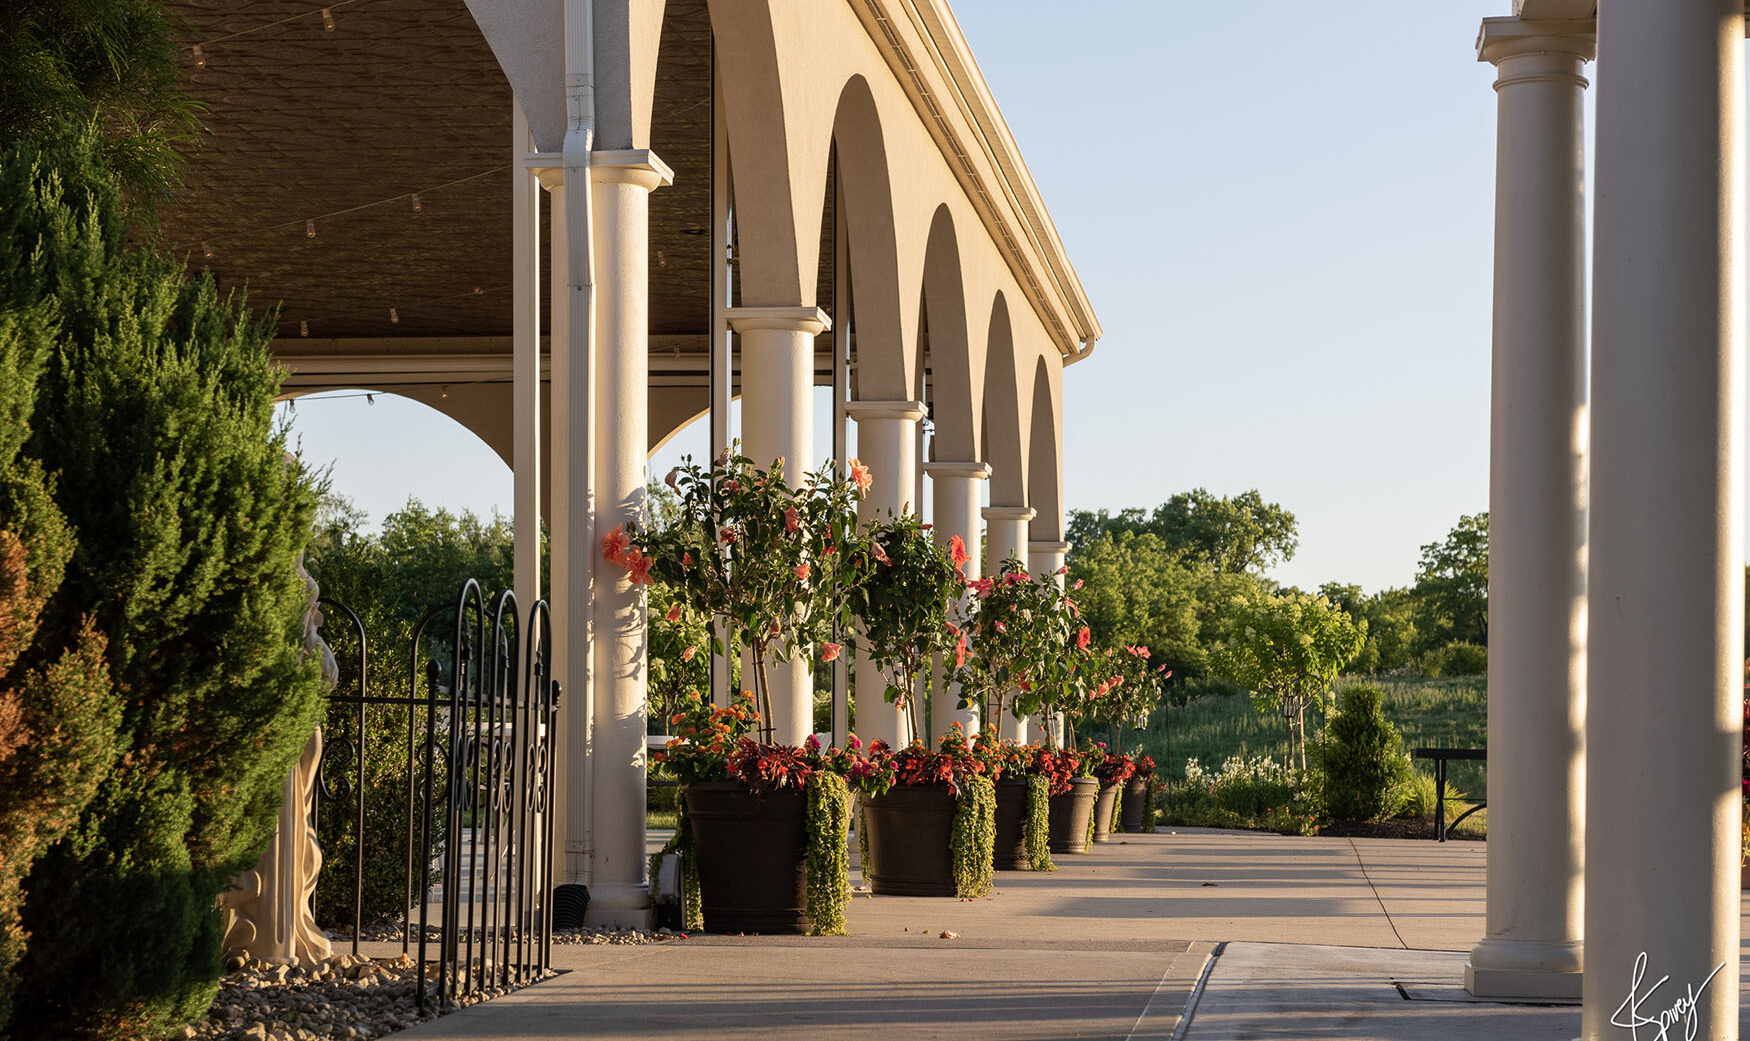 Tuscan style Pavilion with hibiscus in flower pots